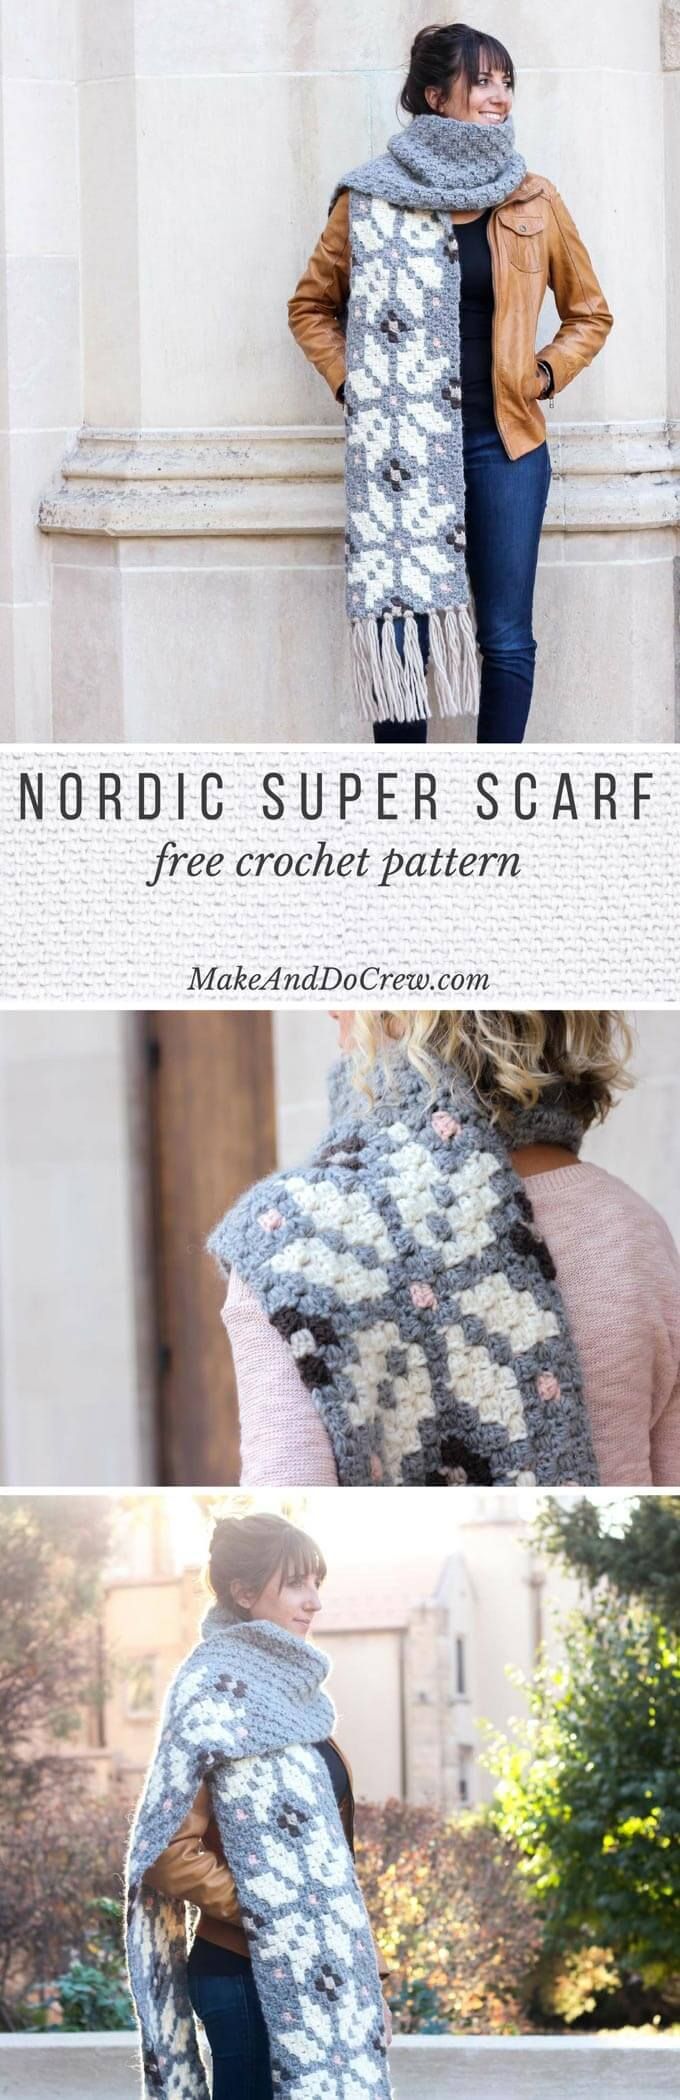 Whether you live in the North Pole or just want to jump on the super scarf trend, this nordic crochet super scarf pattern will